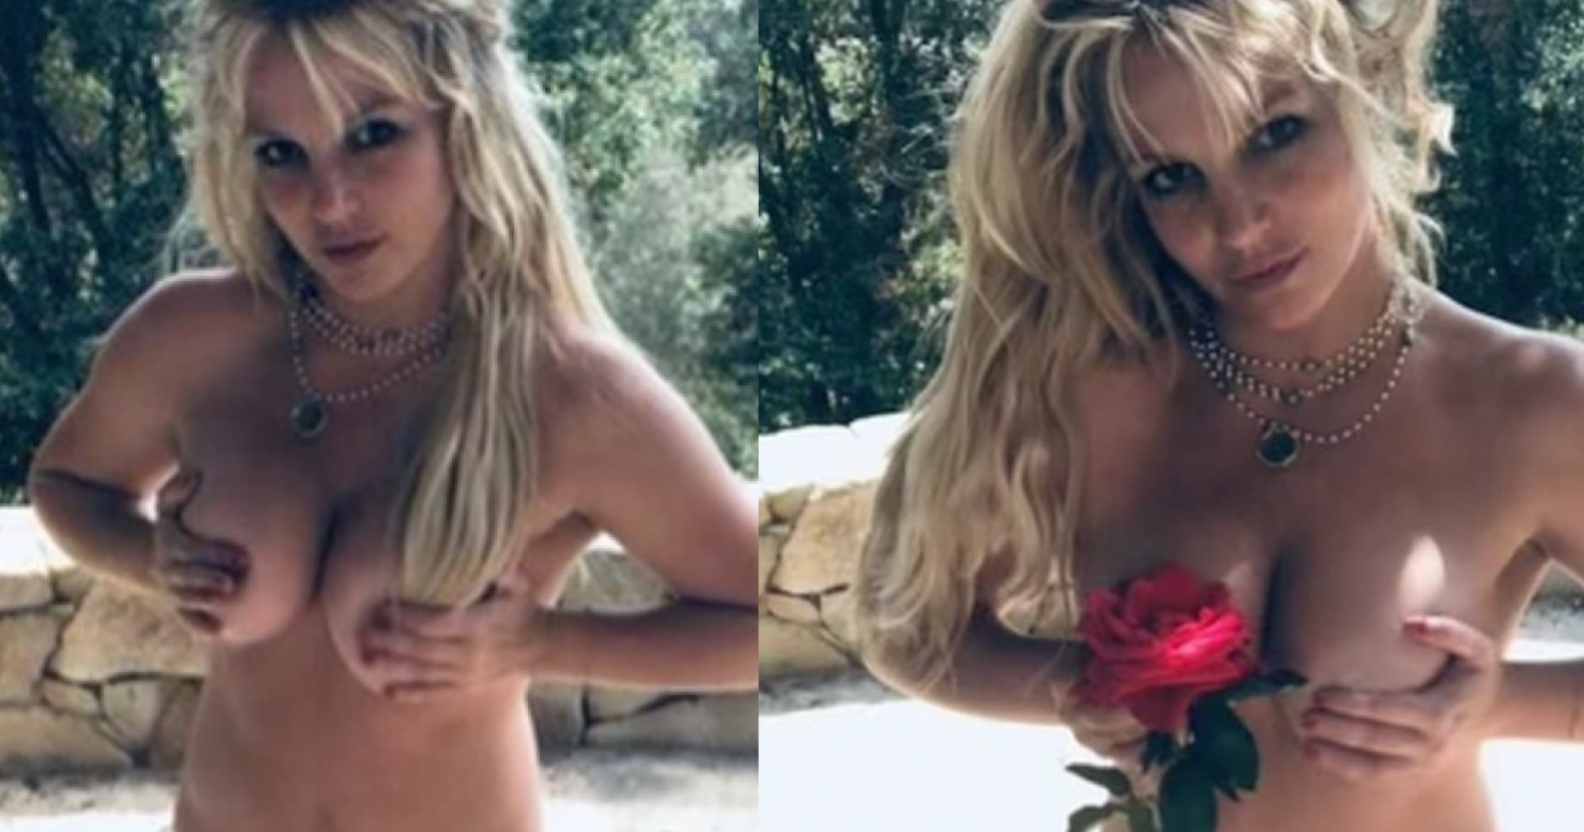 Britney Spears posing topless holding a rose